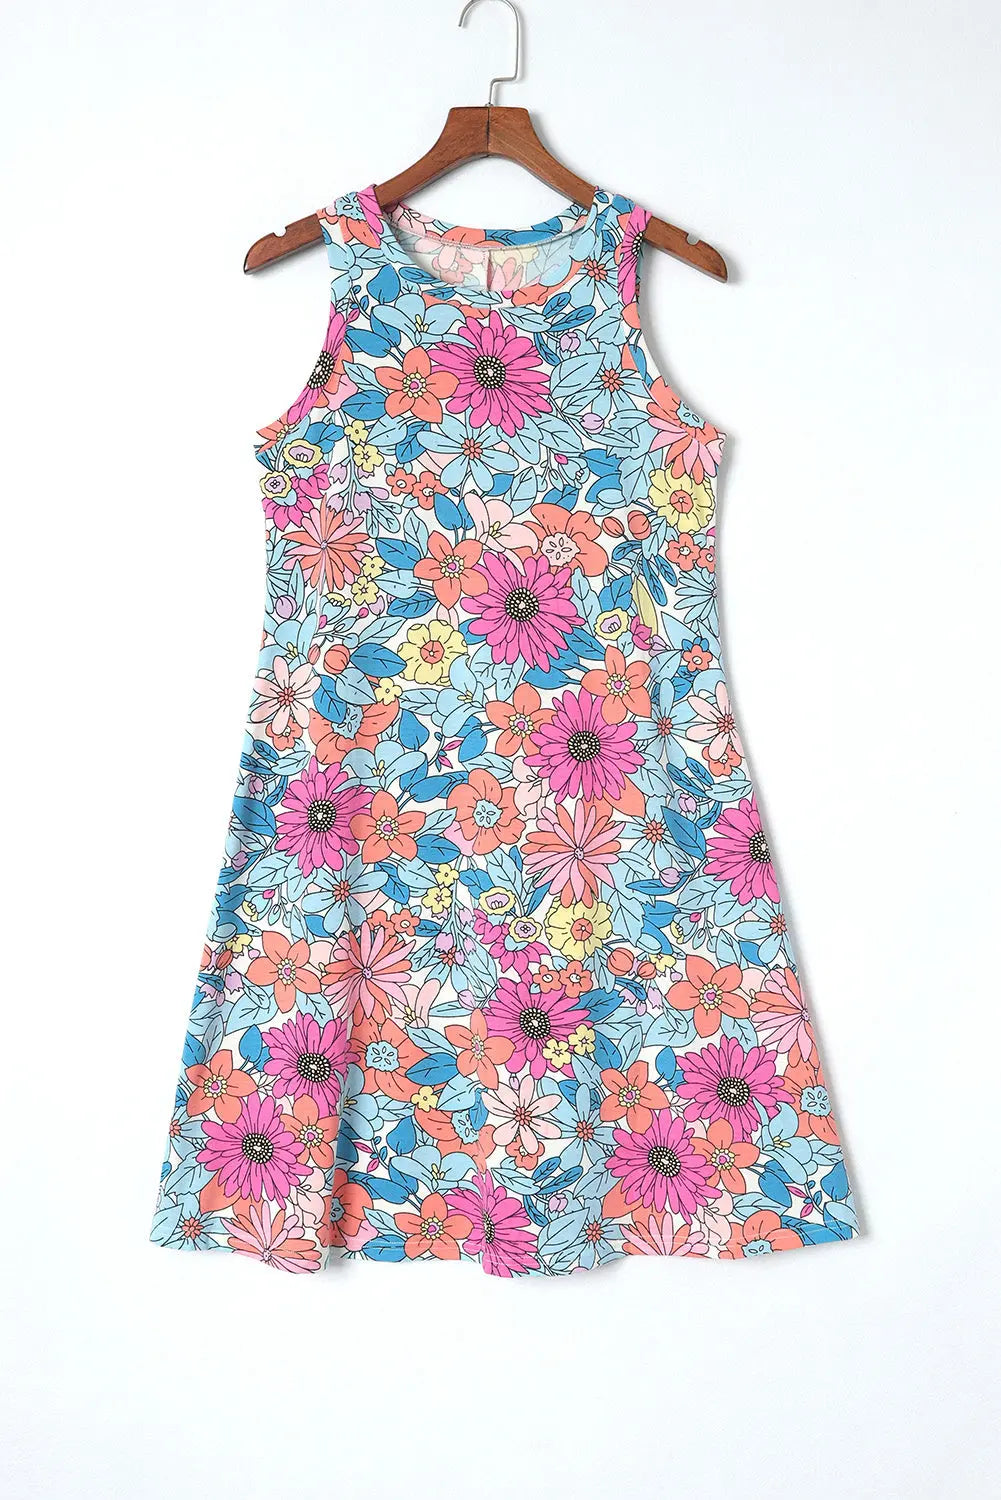 Floral Round Neck Sleeveless Dress  Hot Trends